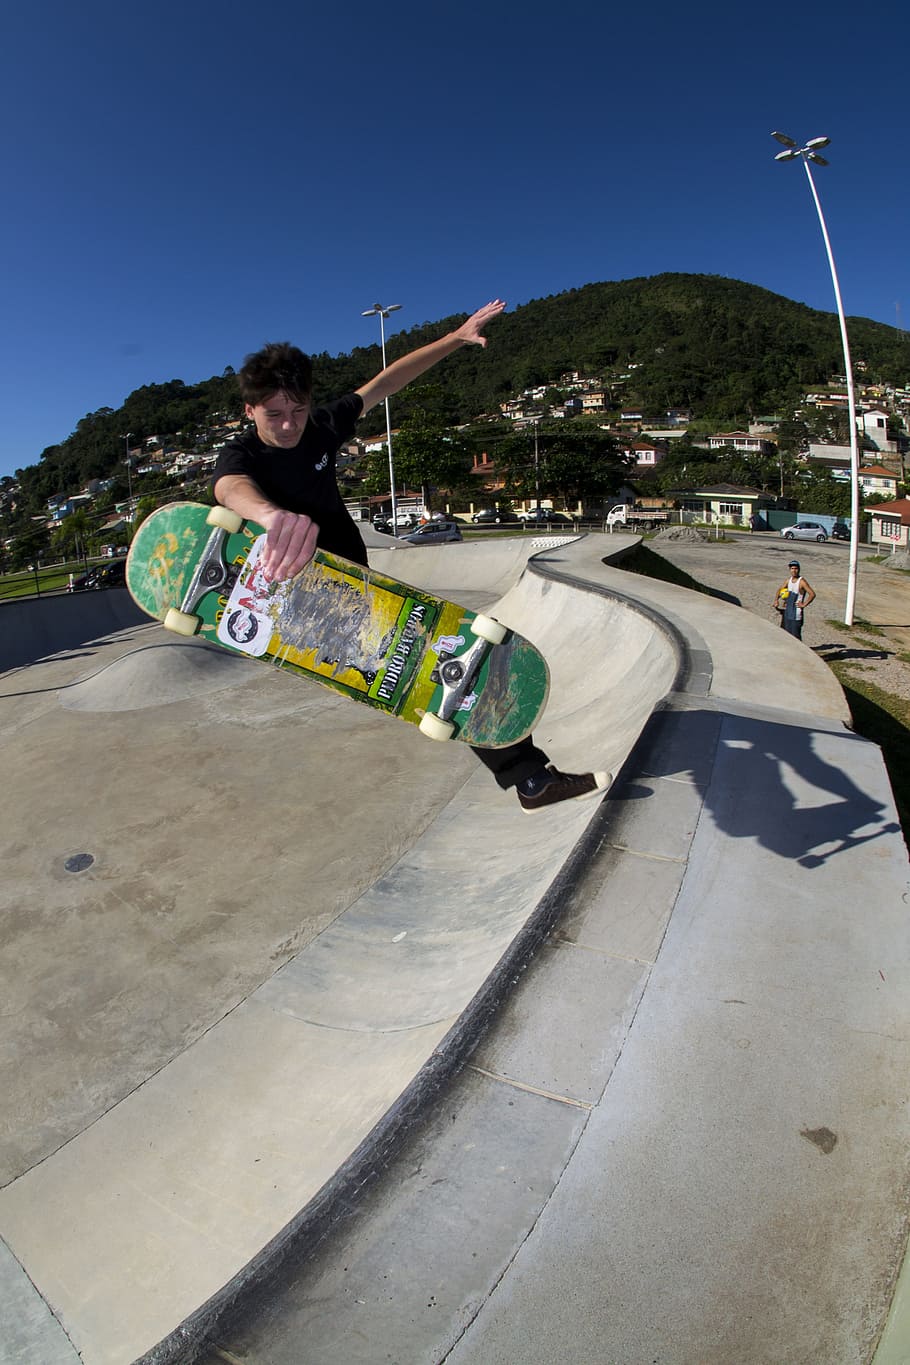 skateboard, extreme sport, florianopolis, real people, leisure activity, one person, lifestyles, sky, skill, nature